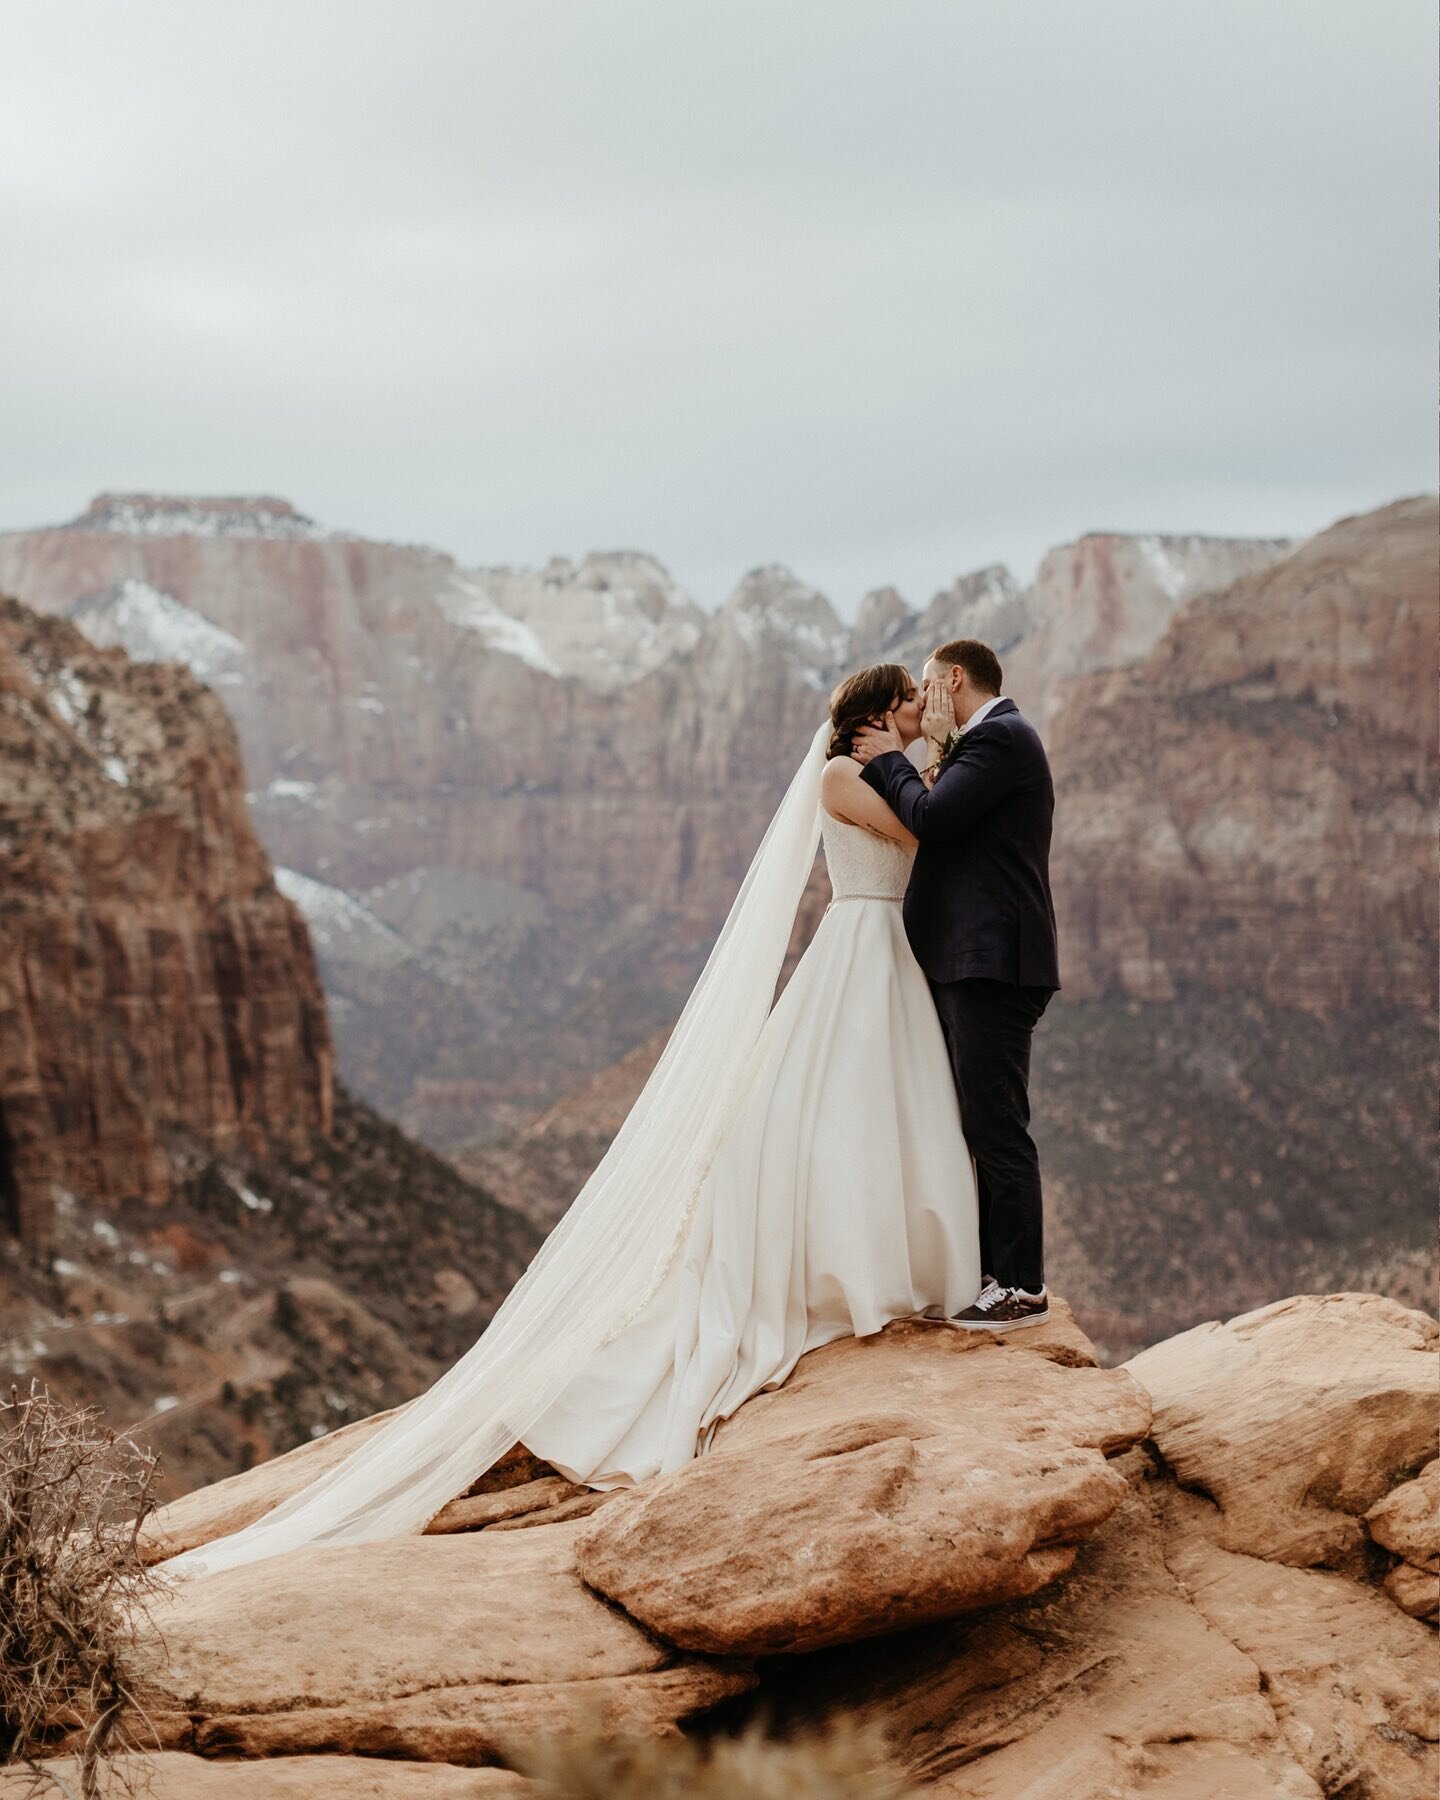 Jordyn + Stephen + their closest friends and family = a perfect elopement day. 😍 

They drove here all the way from Cleveland just to get married among the red rocks of Zion! As long as that journey was, Stephen had actually traveled even further in